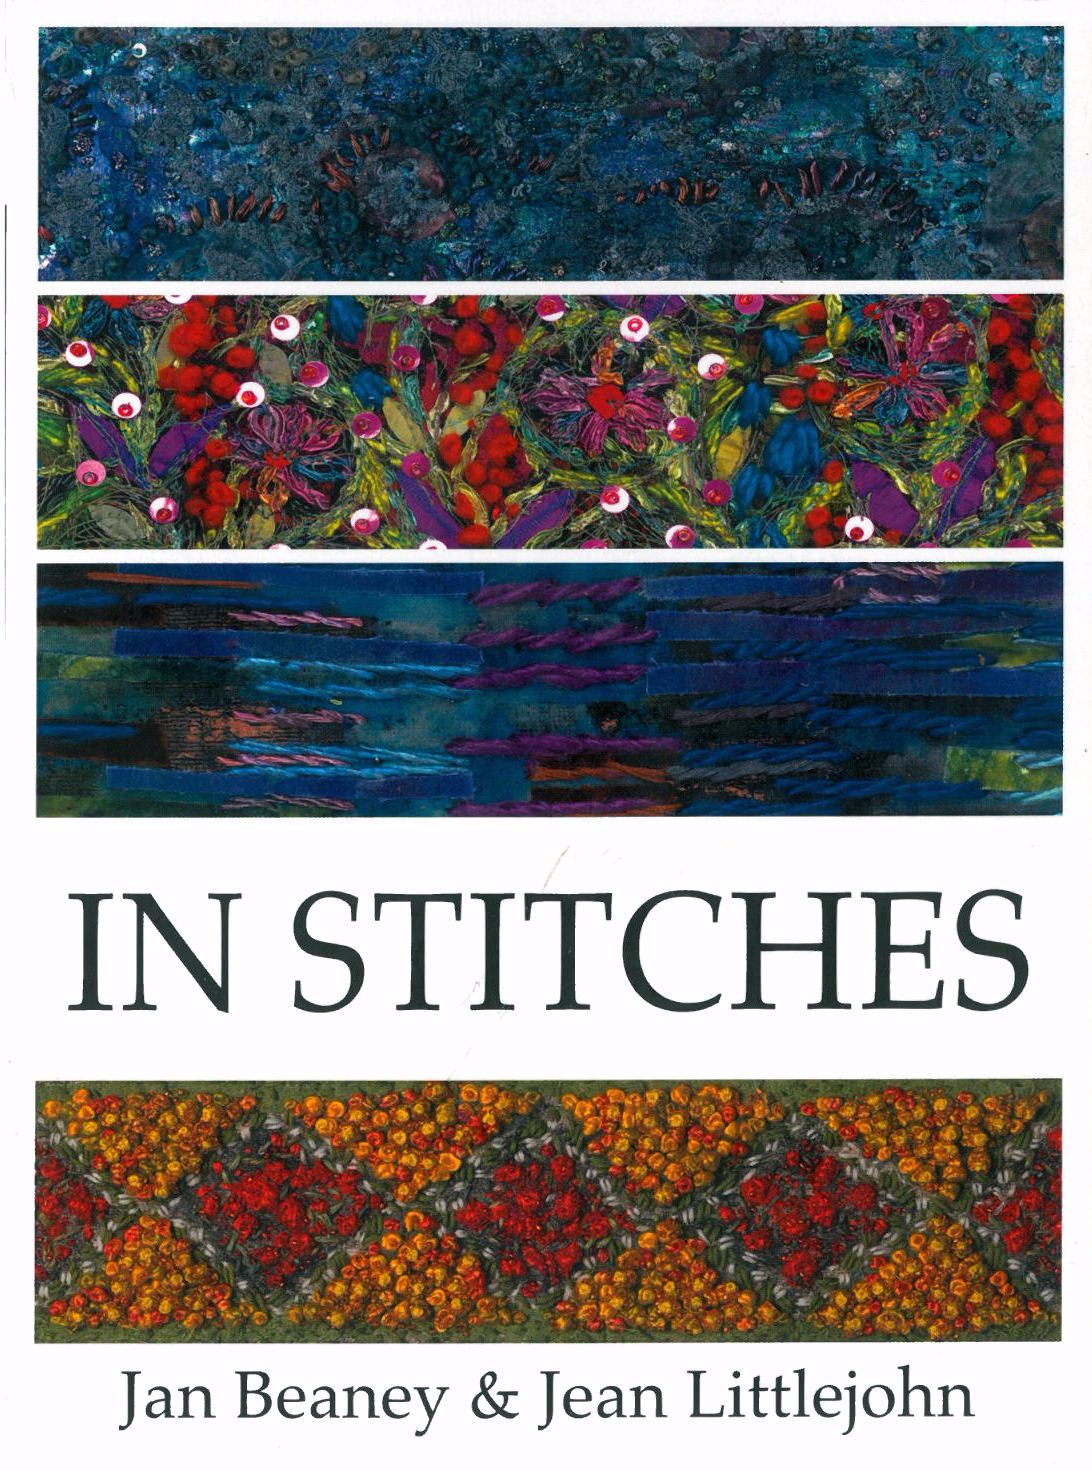 IN STITCHES DVD By Jan Beaney and Jean Littlejohn